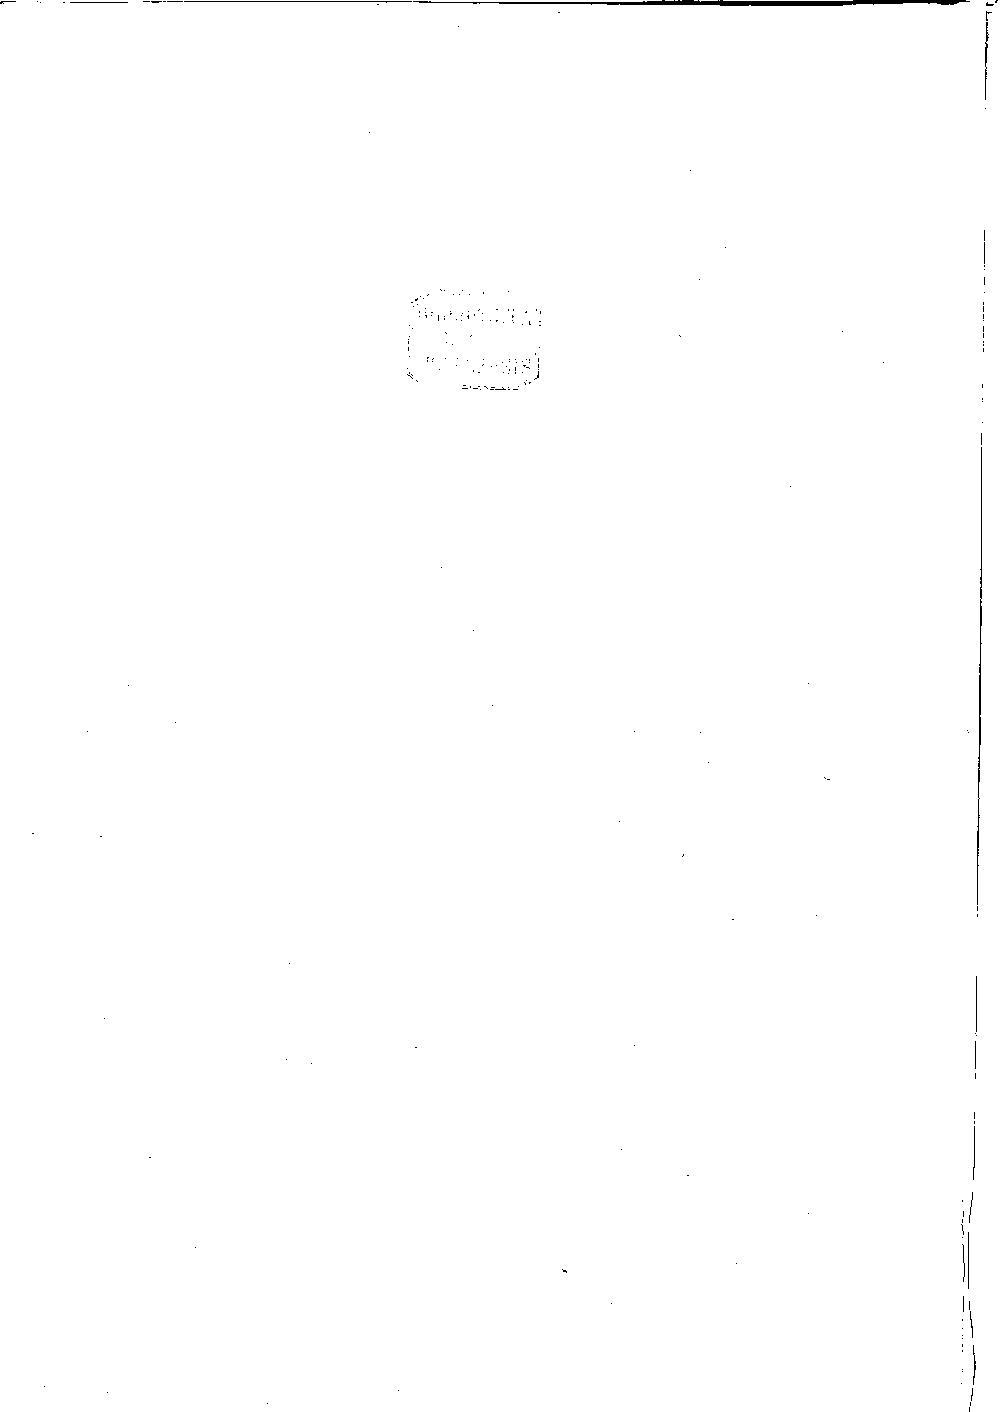 Scan of page II